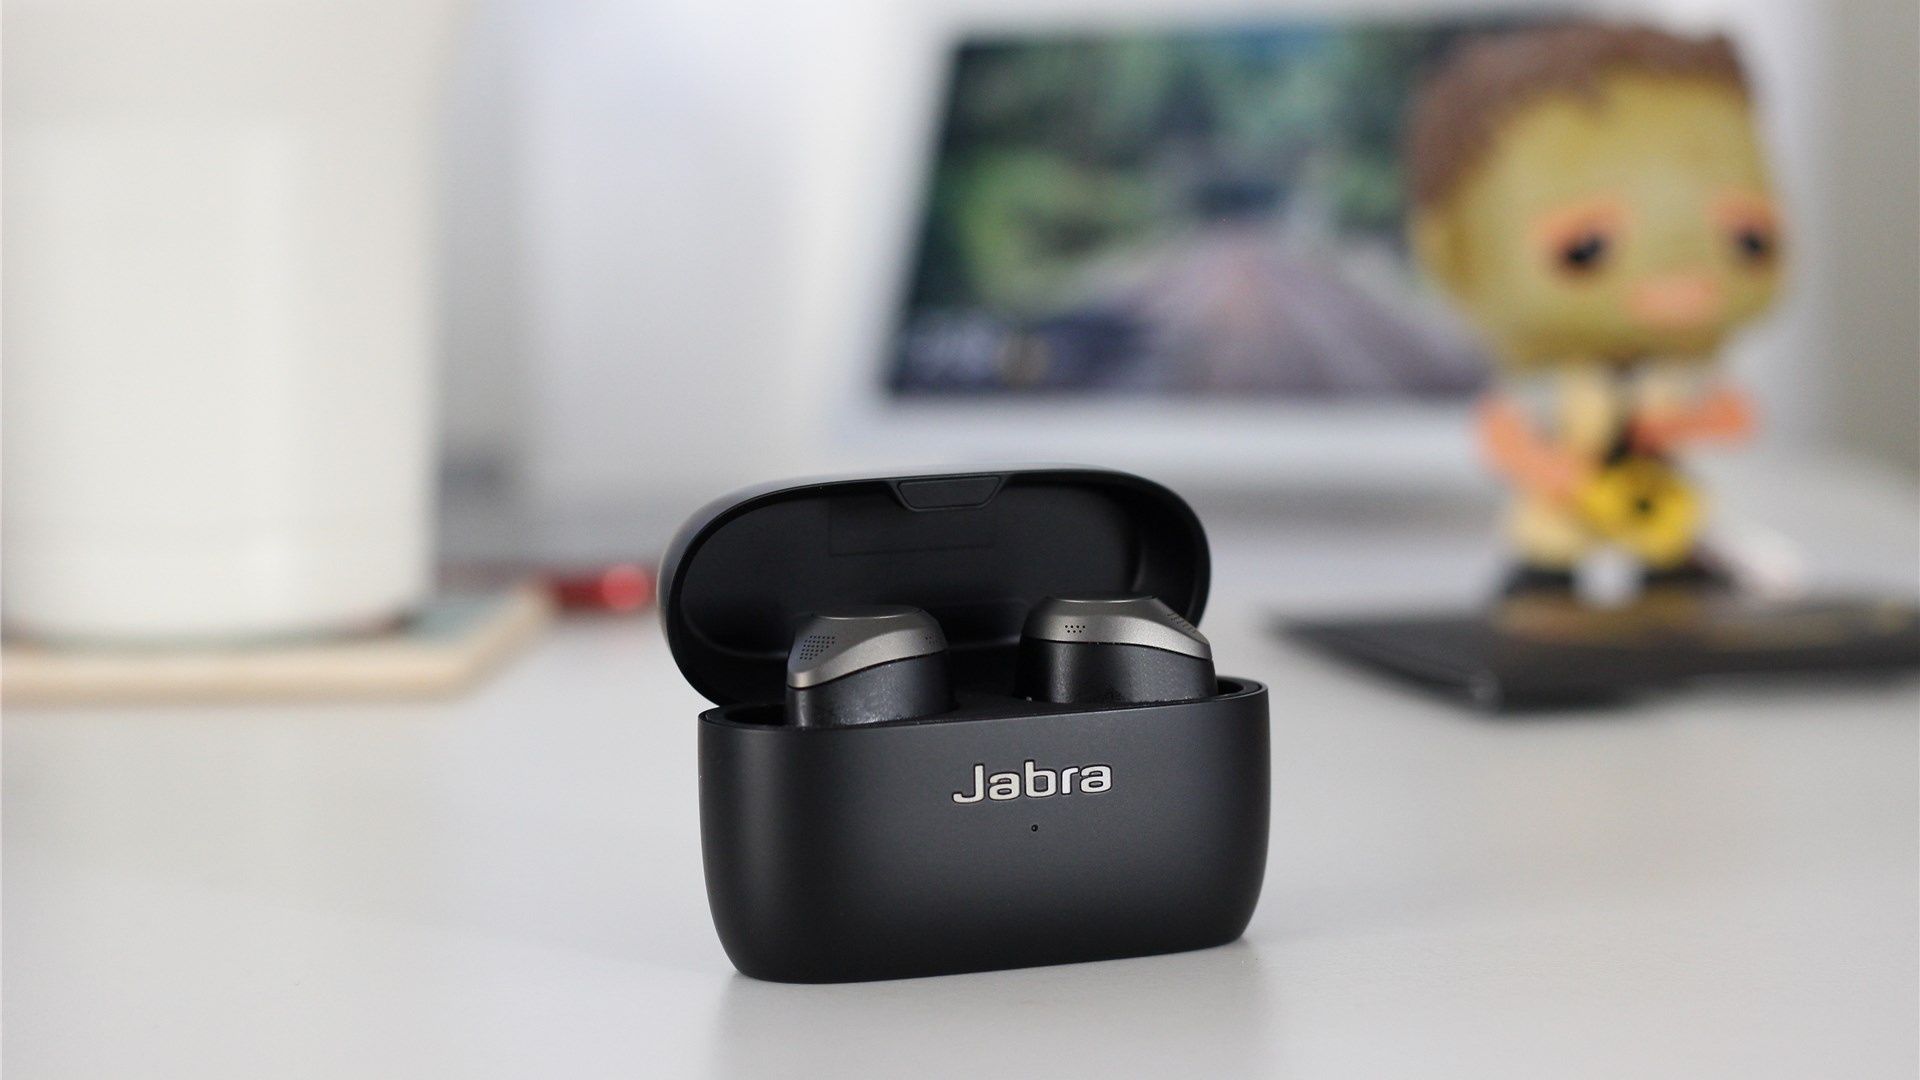 The Jabra Elite 85t case open with the earbuds inside